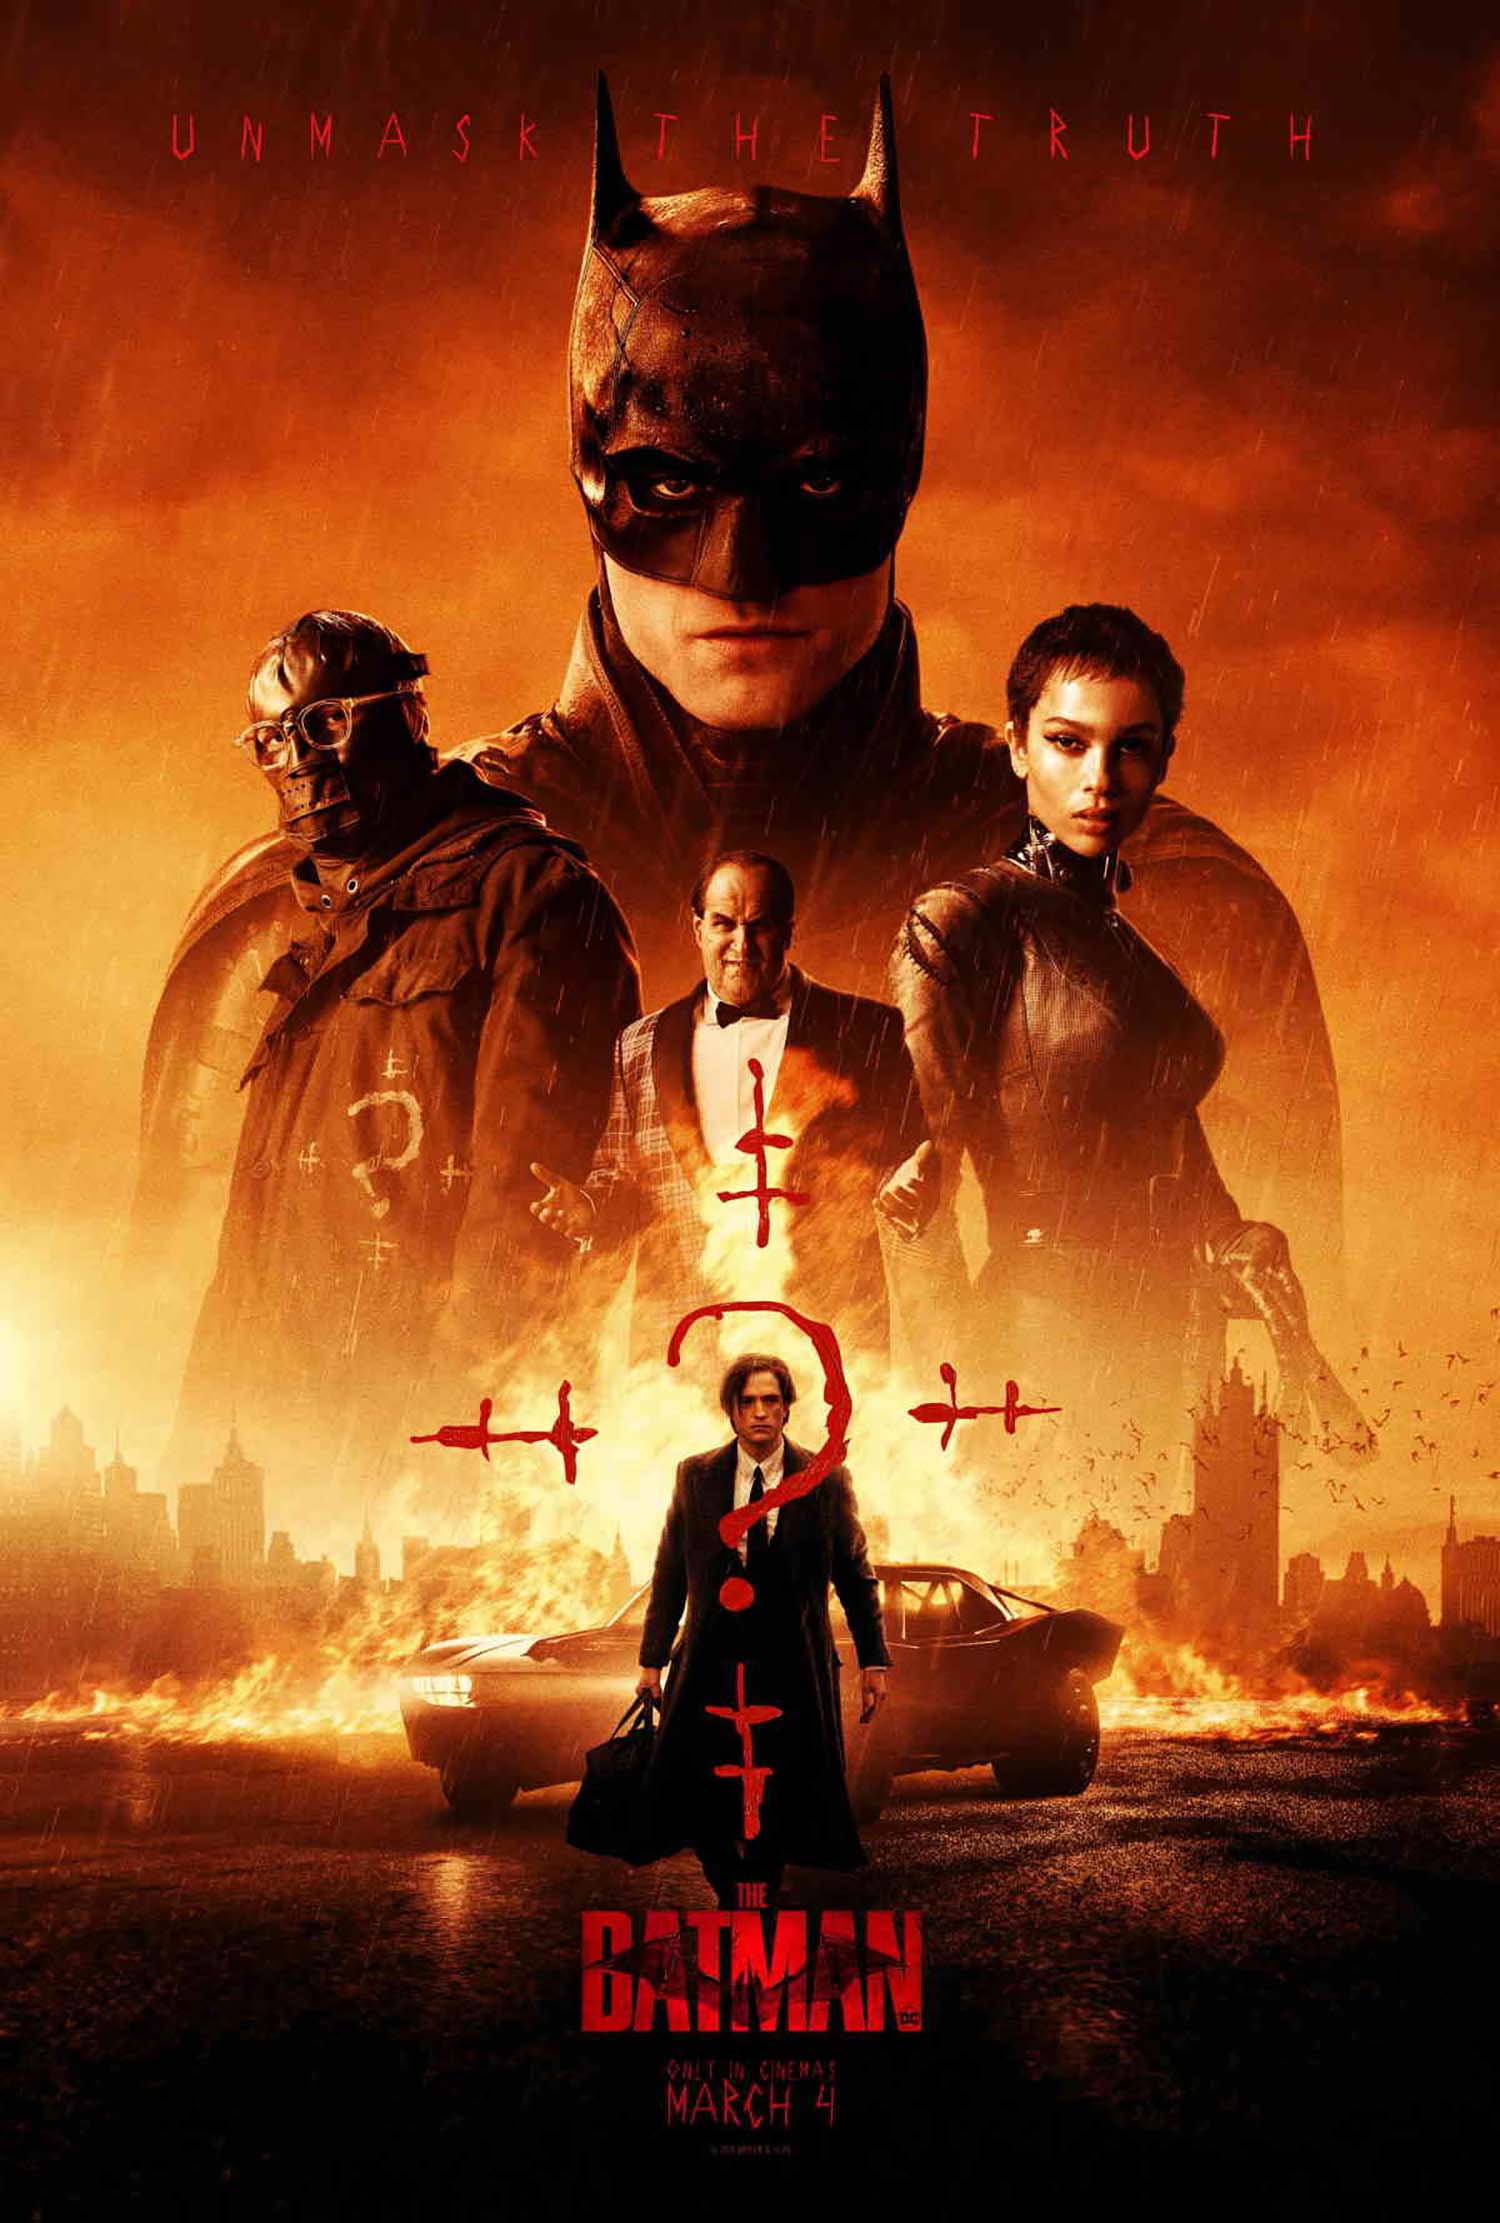 Movie poster for the Batman 2022 movie. The poster features the new cast, Robert Pattinson as Bruce Wayne (Batman), Zoë Kravitz as Selina Kyle (Catwoman), and Paul Dano as Edward Nashton (The Riddler). The poster has dramatic lighting with a yellow/orange tinge. At the top, "unmask the truth" is written in creepy red letters, and "The Batman, March 4" is seen at the bottom below a photo of Pattinson walking away from a car with a fire behind it in a suit and carrying a brief case.